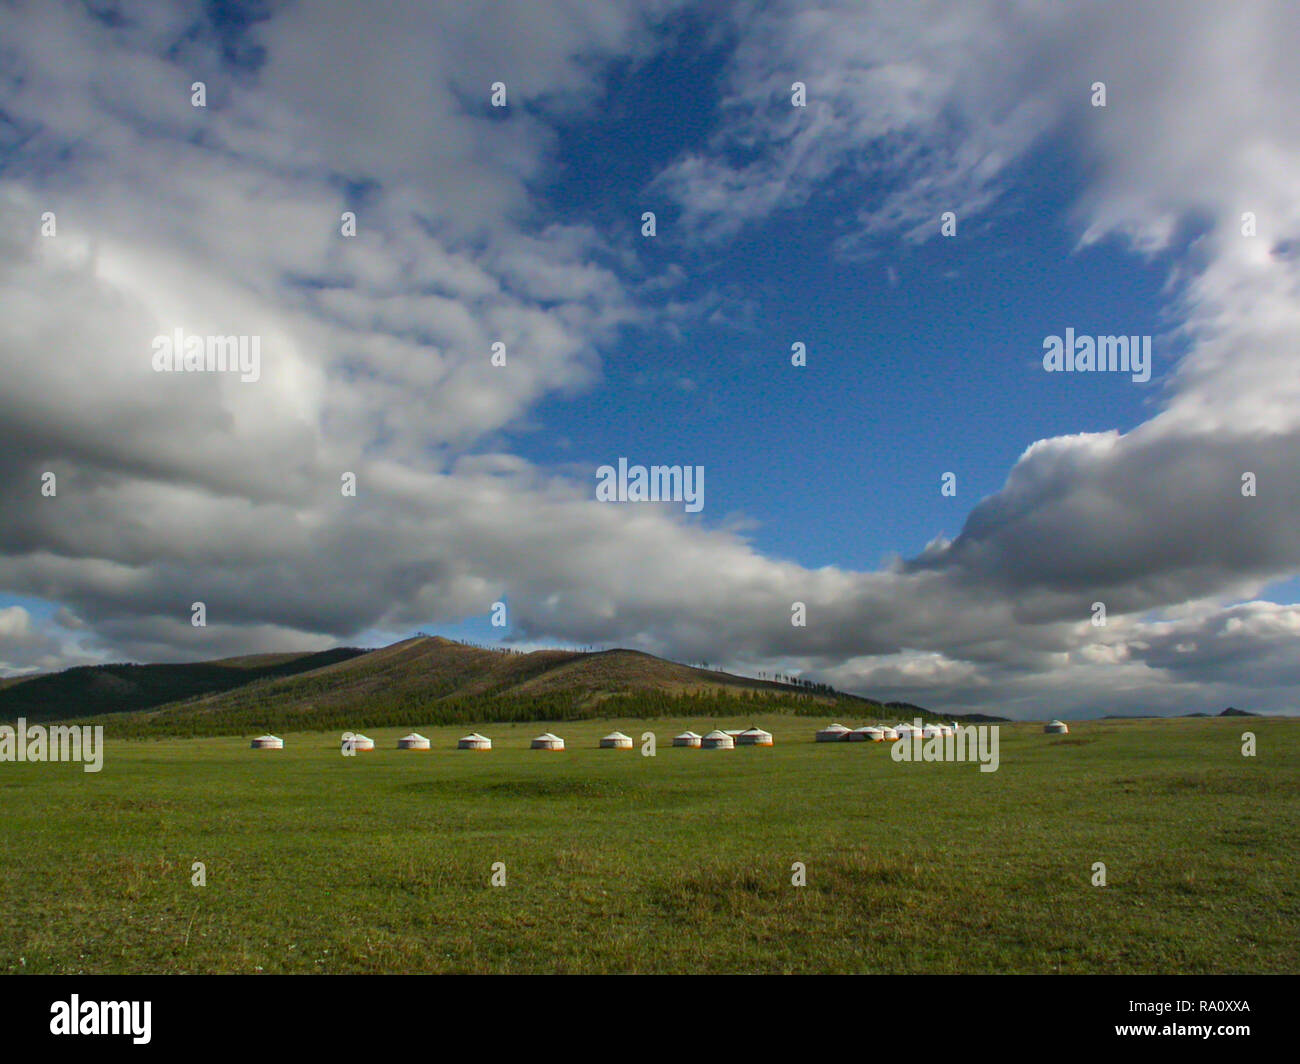 Mongolian Yurt Camp under blue sky with cloud panorama, Tuul River Valley, Khan Khentii, Mongolia Stock Photo